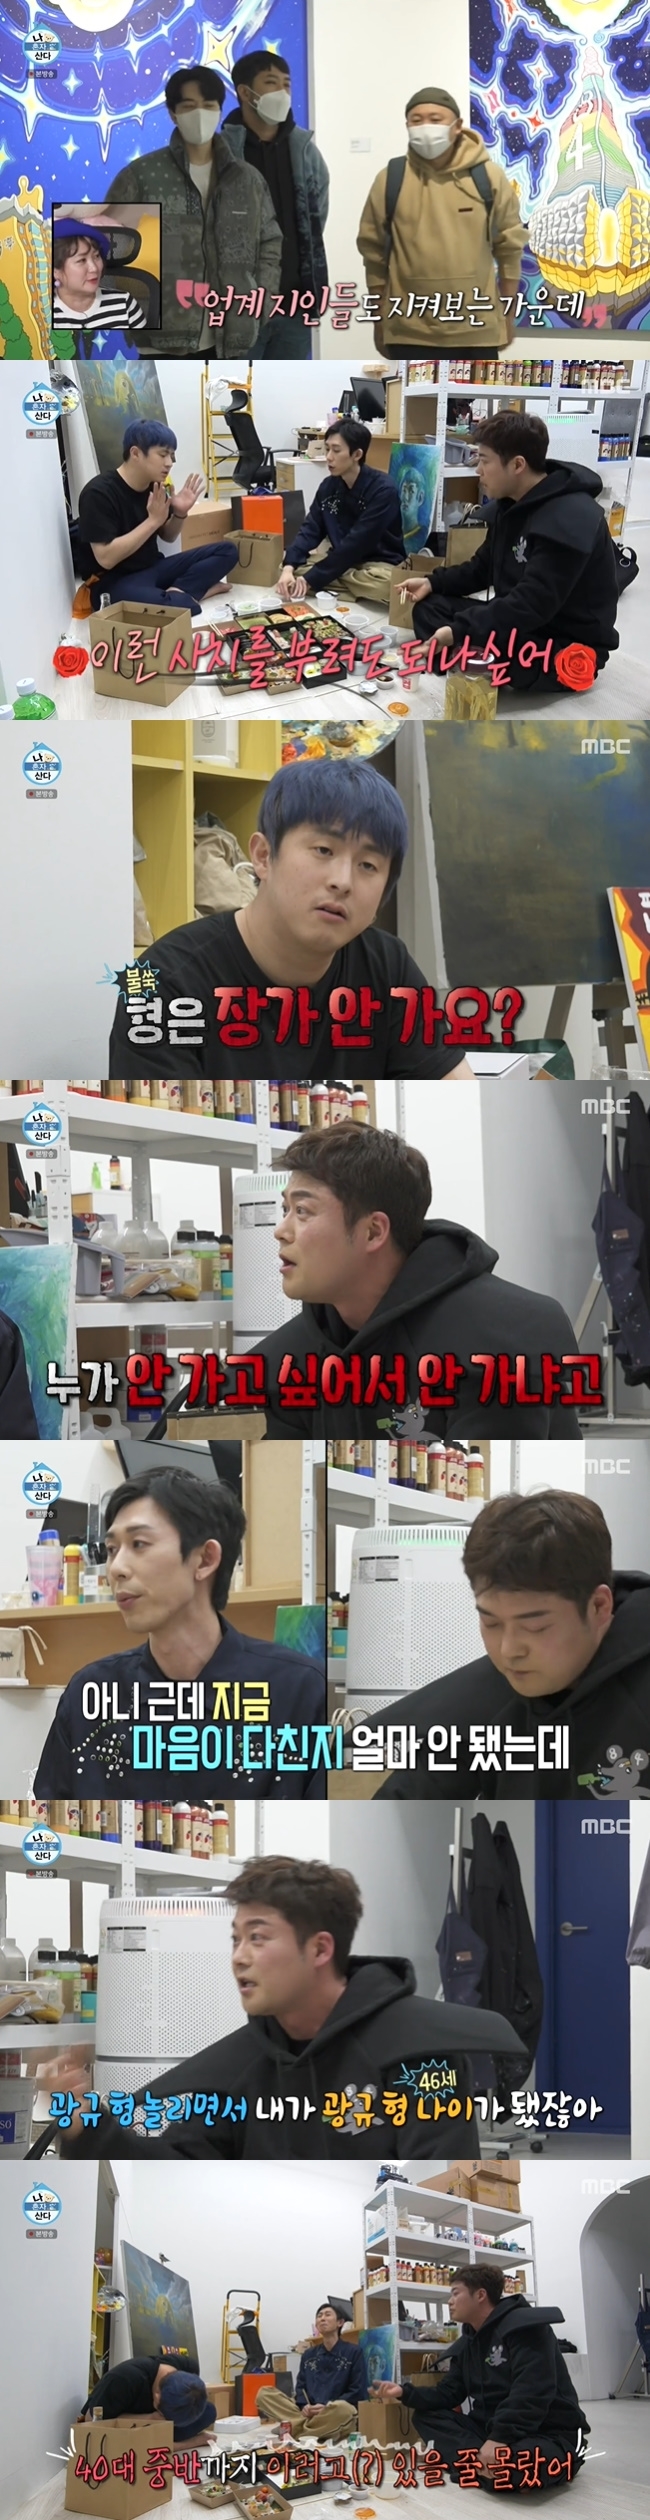 Jun Hyon-moo was bitter about the situation that he could not get married even in his mid-40s, referring indirectly to Lee Hye-sungs separation.MBC I Live Alone, which was broadcast on April 22, revealed the appearance of Kian84, which successfully completed its first exhibition.In the opening, Jun Hyon-moo pointed to weight changes for Lee Jang-woo, who appeared as a guest.After being invited to the Narae members house, my stomach grew bigger and my mouth was open, and I think I got 5kg of it after I went there, Lee Jang-woo said.When Lee Jang-woo mentioned the three-tier trim of Lee Jang-woo, who collected the topic in the last broadcast, Lee Jang-woo revealed the story of his mothers troubles because of the trim after the broadcast.Lee Jang-woo unveiled a new house that moved a month ago with a unique structure; the luggage was not cleared, so the gym was gone unlike the previous house.Lee Jang-woo, who lost 25kg in 100 days a year ago, said, I finished my diet by eliminating the exercise room.I was on the exercise equipment for an hour every day when I started working out this time last year. I dont want to see it now.Lee Jang-woo, who ate a tuna-armed Achibimbap made with a huge amount of butter mistaken for soap and tofu, trimmed four times as soon as he finished his meal.Lee Jang-woo excused himself for the increase in stomach during the gourmet, but Jun Hyon-moo pointed out that the food is getting bigger, it is the child of the food industry.Lee Jang-woo, who shared his exercise equipment with his close brother who came home, Top Model on a jar barbecue with his paws on a spacious veranda next to the second floor bedroom.After drilling the hole, he put the can with charcoal in a jar and started baking meat.Lee Jang-woo then recalled memories of Yangpyeongs power house where he lived with his parents and made Top Model to soak the house soy sauce.The performers were surprised to see Lee Jang-woo, who puts yellow, jujube, and meju in salt water.Unlike Lee Jang-woos confidence, It always was, but it was today, I seem to be cooking well, the completed paws were filled with blood, and eventually the oven was grilled with meat to save face.Kian84 stepped out as a docent for acquaintances and visitors who came to the solo exhibition for eight months.Kian84 was sweating with the sharp questions of Joo Ho Min, this last year, and Park Tae Jun, and was impressed by the gifts of elementary school alumni.When a friend asked, When are you getting married? Kian84 said, No one Im seeing now. Im going. Im 40 next year.Jun Hyon-moo and Code Kunst visited the exhibition hall after Kim Chung-jae followed by Meow and Jeon Seon-wook.Cod Kunst, who knows art well, found changes in speech and had in-depth conversations with Kian84, while Jun Hyon-moo asked, Is that more expensive?Jun Hyon-moo showed an active appearance in the souvenir corner, unlike when watching the work.In the appearance of Jun Hyo-moo, who bought a souvenir full of both hands, Park said, I thought he was a buyer of Dongdaemun.Kian84 started a back-up in the workshop with Jun Hyon-moo and Code Kunst.Jun Hyon-moo ordered Kian84s favorite seafood and various sushi, and Code Kunst took out 20-year-old ginseng wine from the gourmet.Jun Hyon-moo, who is not usually drinking well, drank ginseng for Kian84. Kian84 said, From morning, I felt like Can I do this?Id like to have this luxury, but Im not going to be able to do it, he said.Jun Hyon-moo, who started talking nonsense drunk, asked Kian84, My brother is not a long-time Ghana.Im drunk, Im not annoyed, said Jun Hyun-moo, who laughed at the sudden question, Im not annoyed, I dont want to go to Ghana.Code Kunst said, But now I have just been hurt, he indirectly mentioned the breakup between Jun Hyon-moo and Lee Hye-sung.Jun Hyon-moo told Kian84, who proposed a two-to-two meeting, I laughed at Kim Kwang-kyu and I was Kim Kwang-kyu older.I didnt know I was doing this until my mid-40s, he said, but I made him my brother, and I was that old.Marriage is not your will.